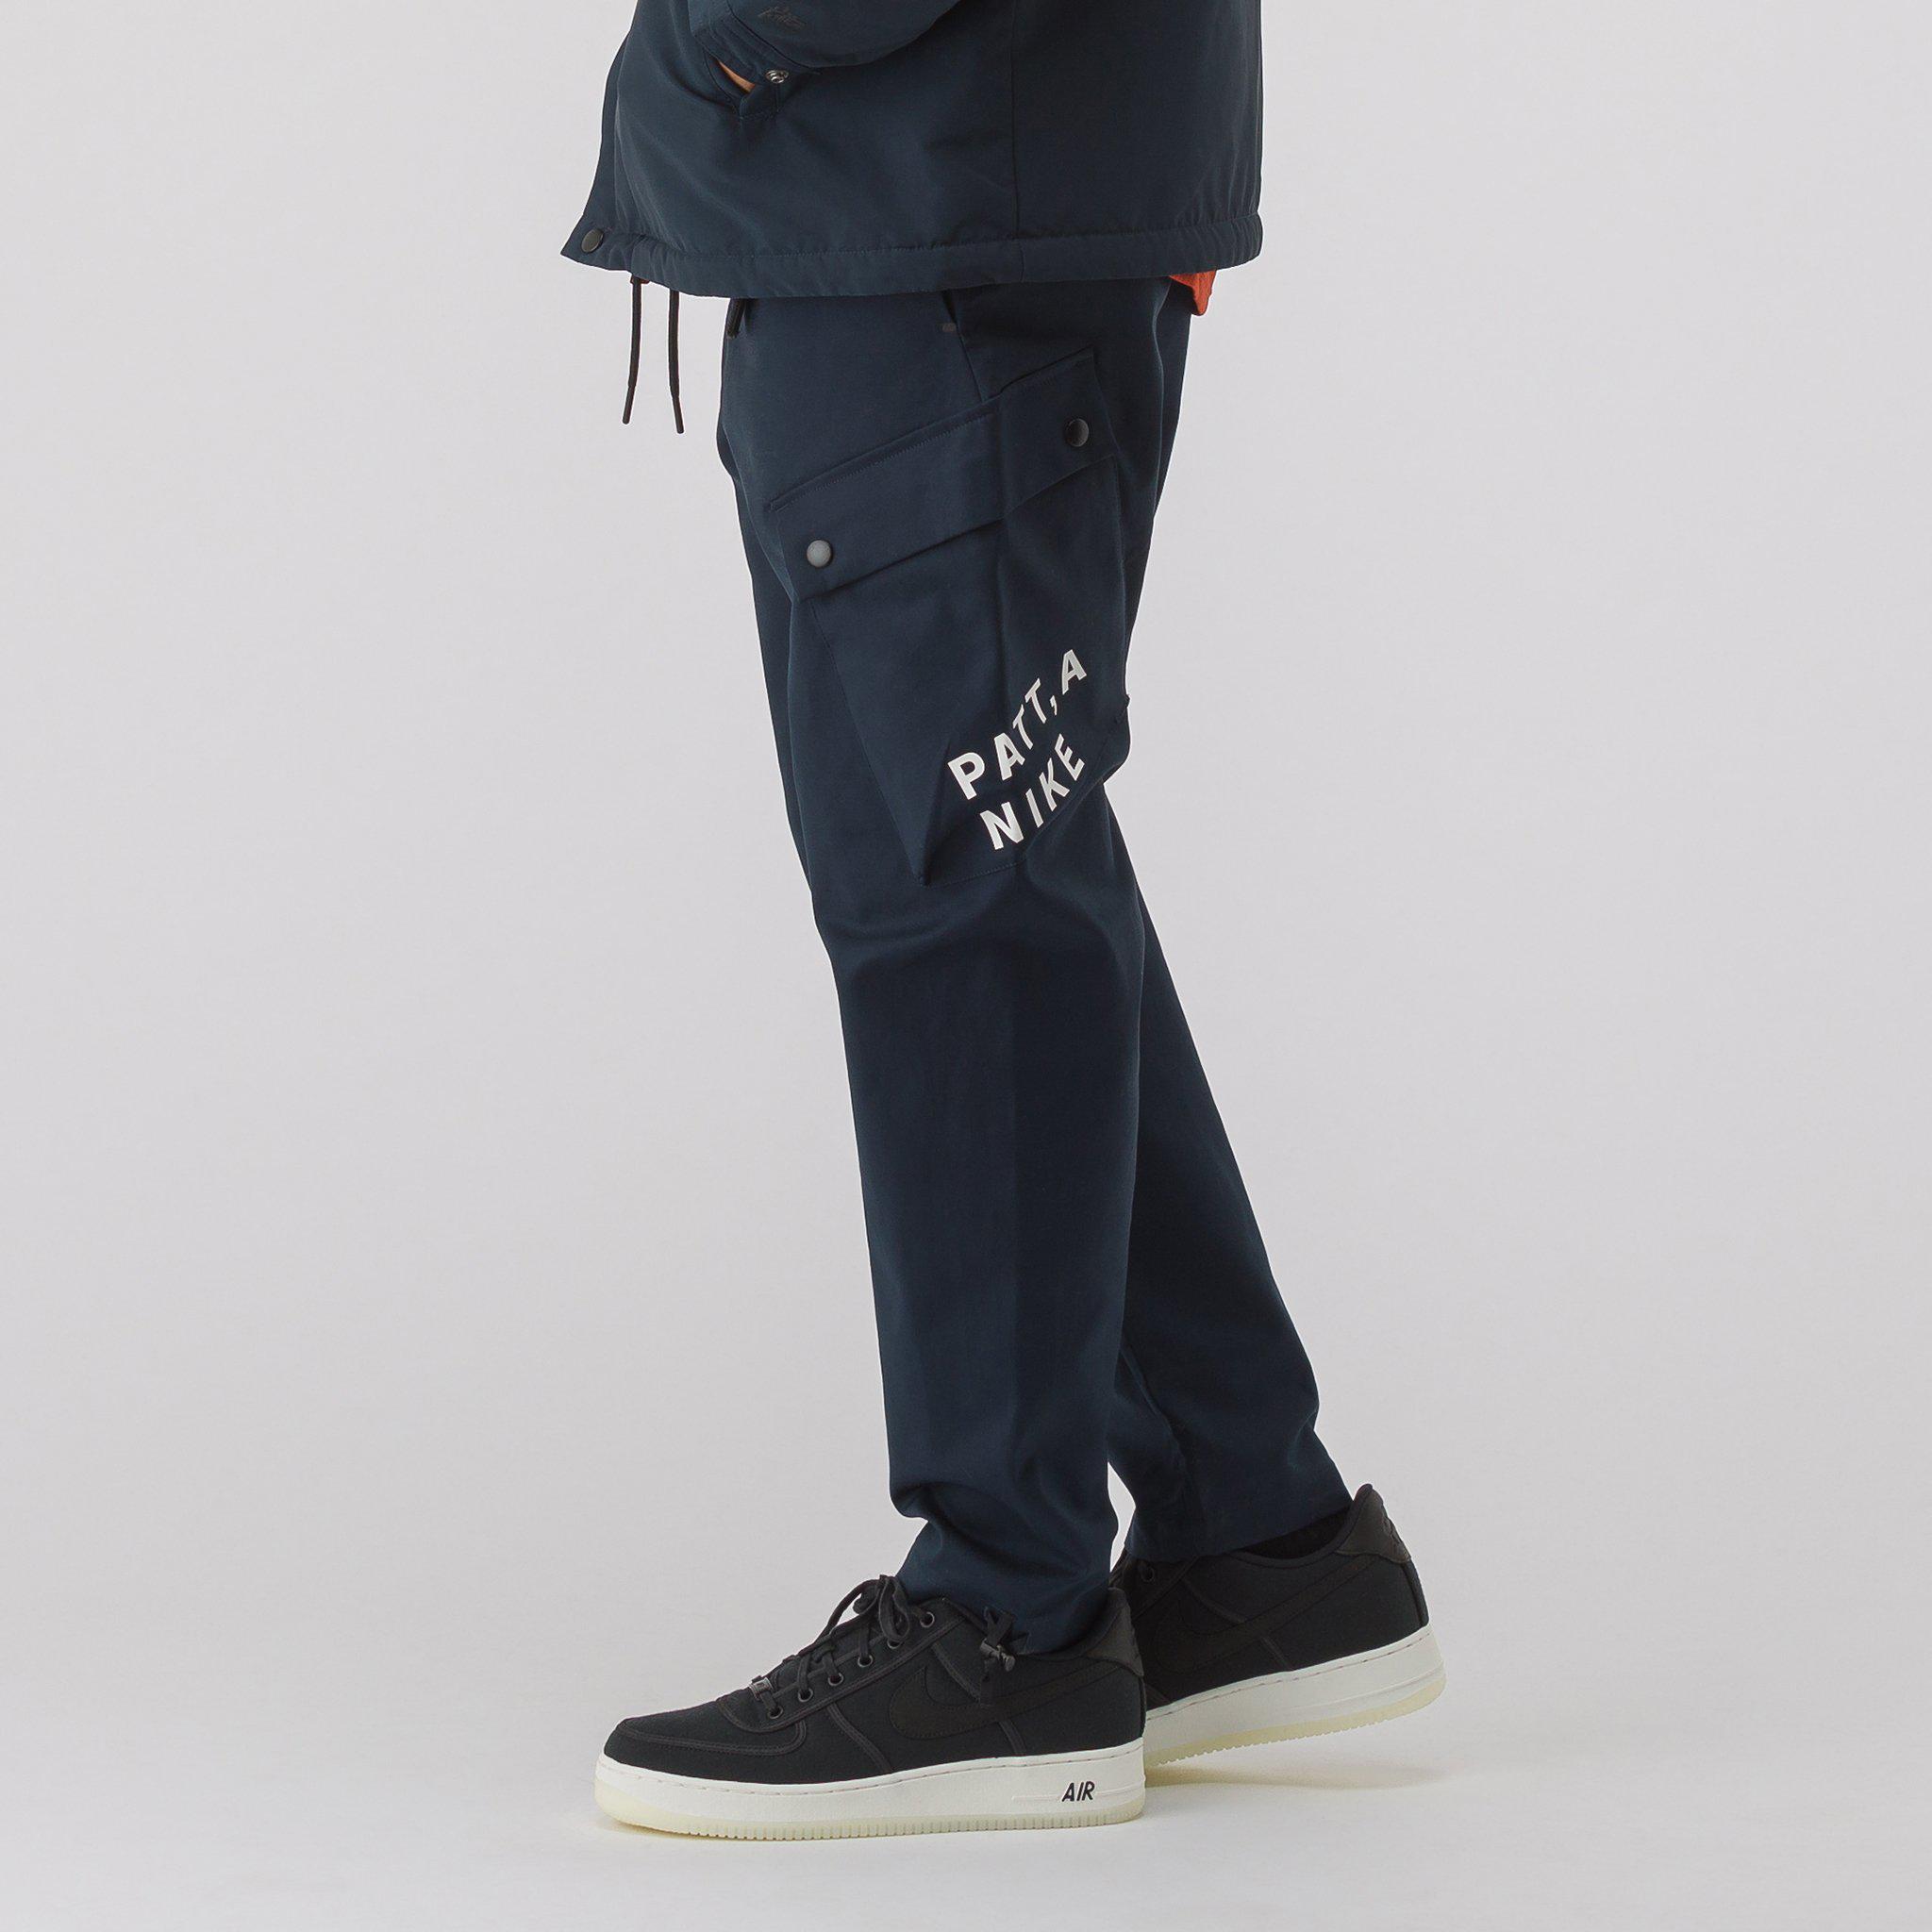 Nrg X Patta Cargo Pant Flash Sales, UP TO 50% OFF | www.realliganaval.com